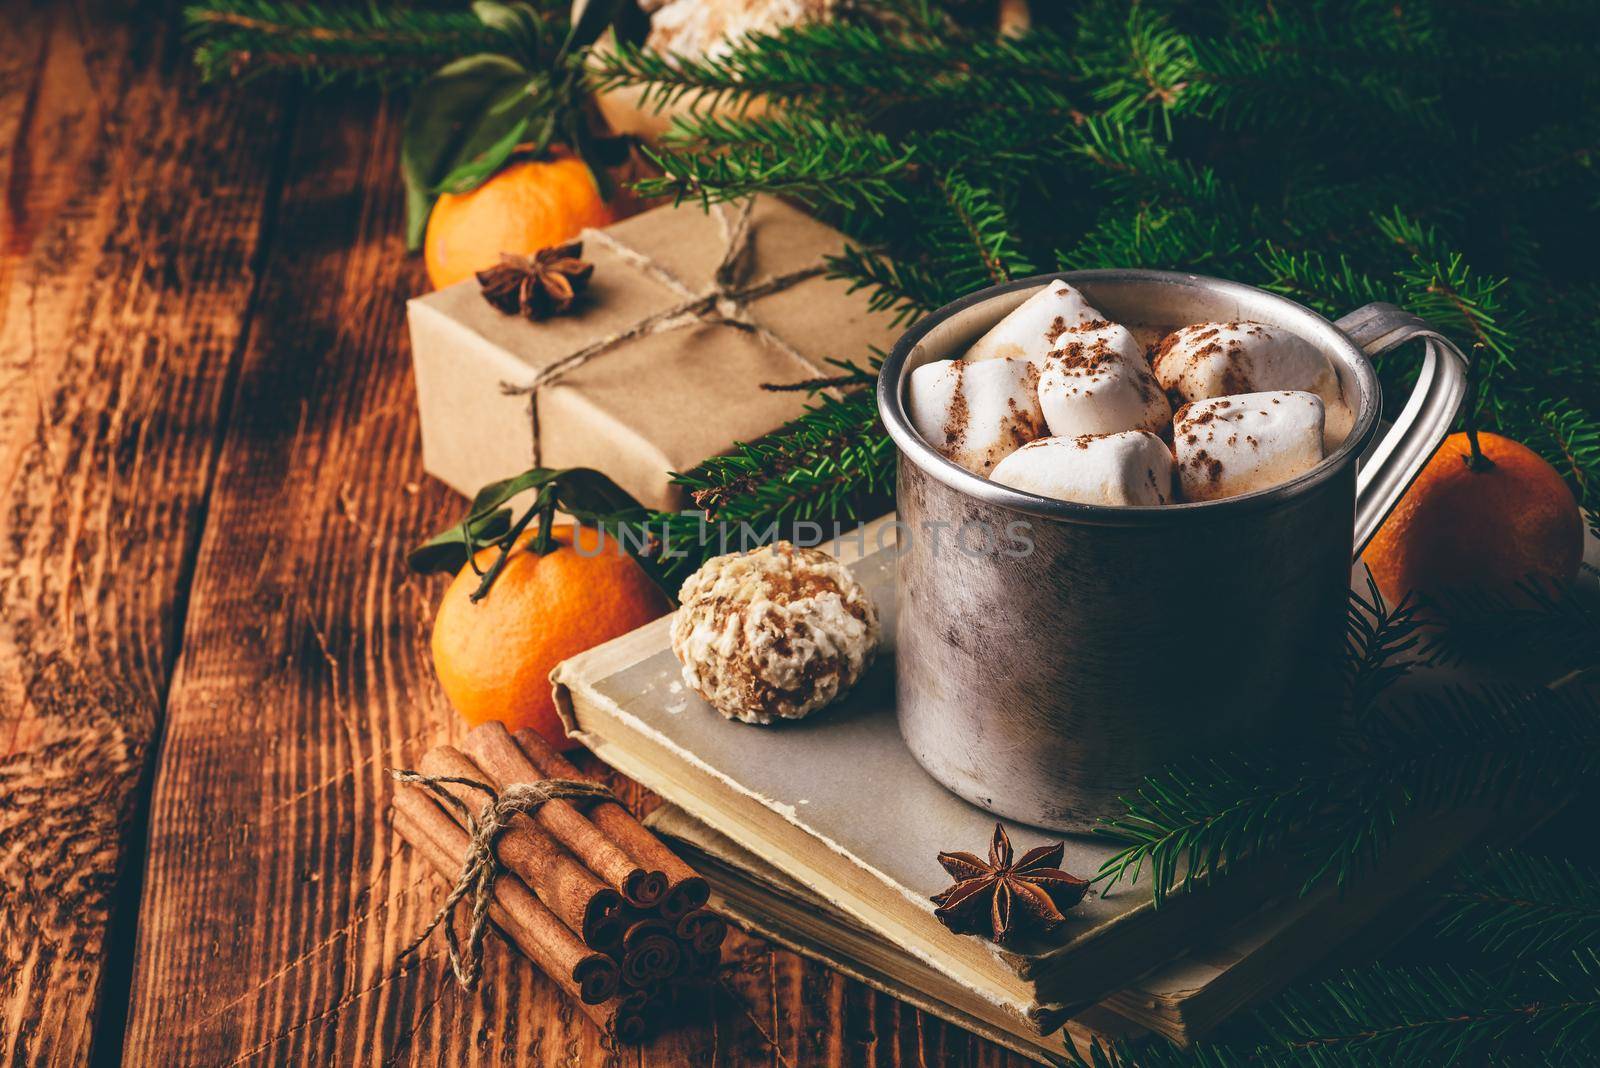 Mug of hot chocolate with marshmallows over wooden table